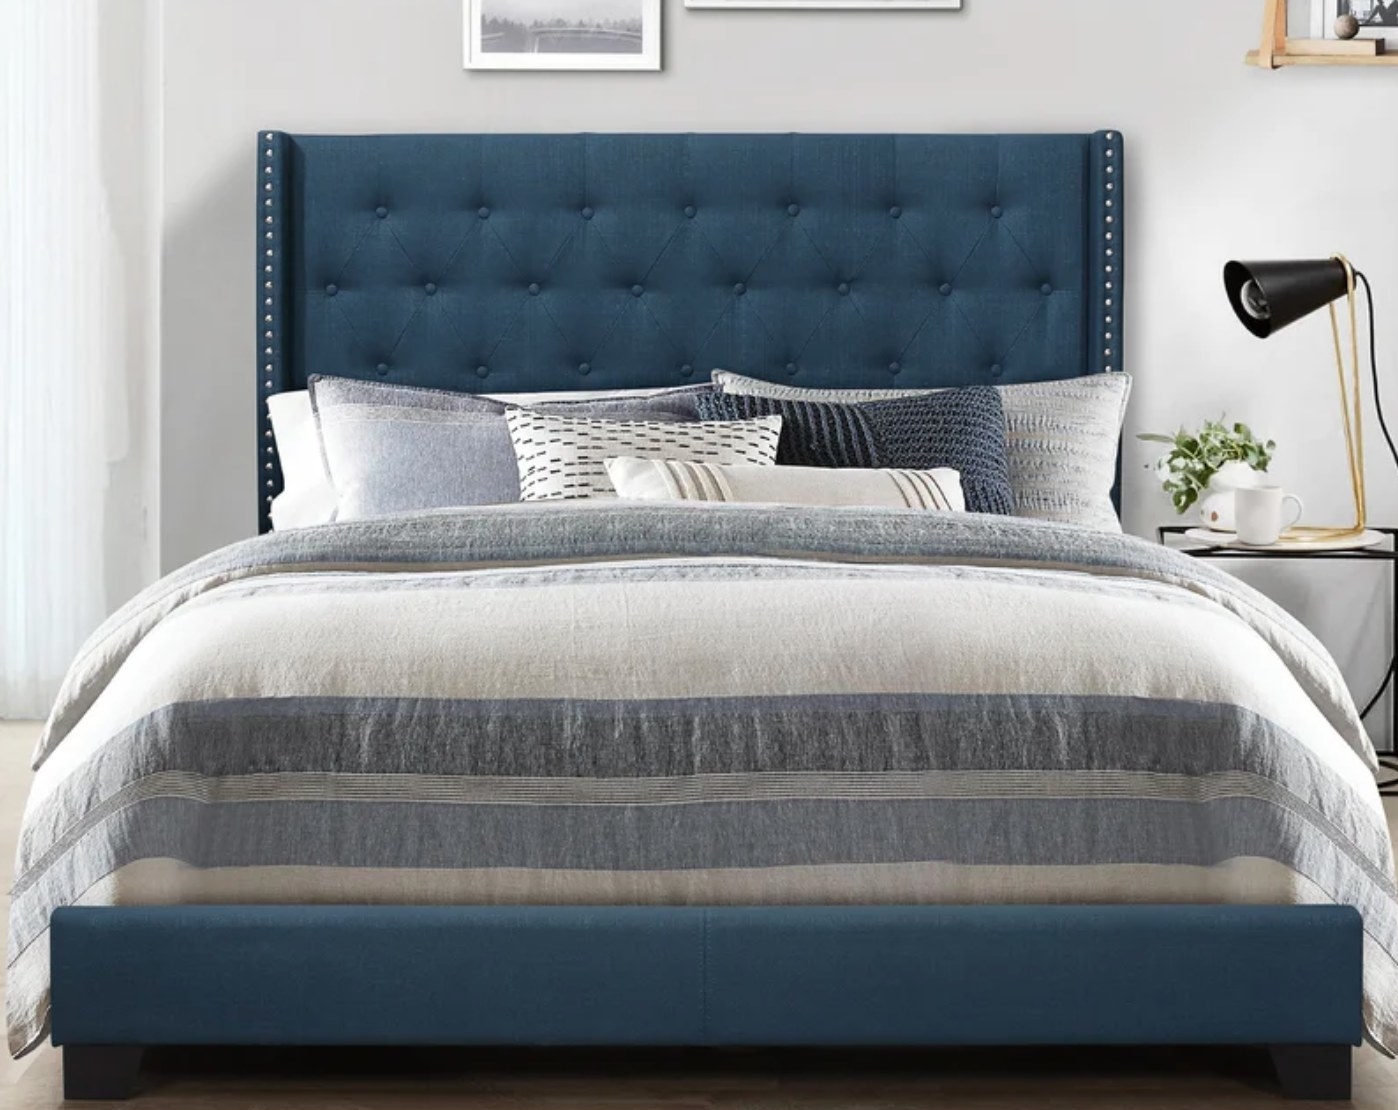 The upholstered bed frame in blue